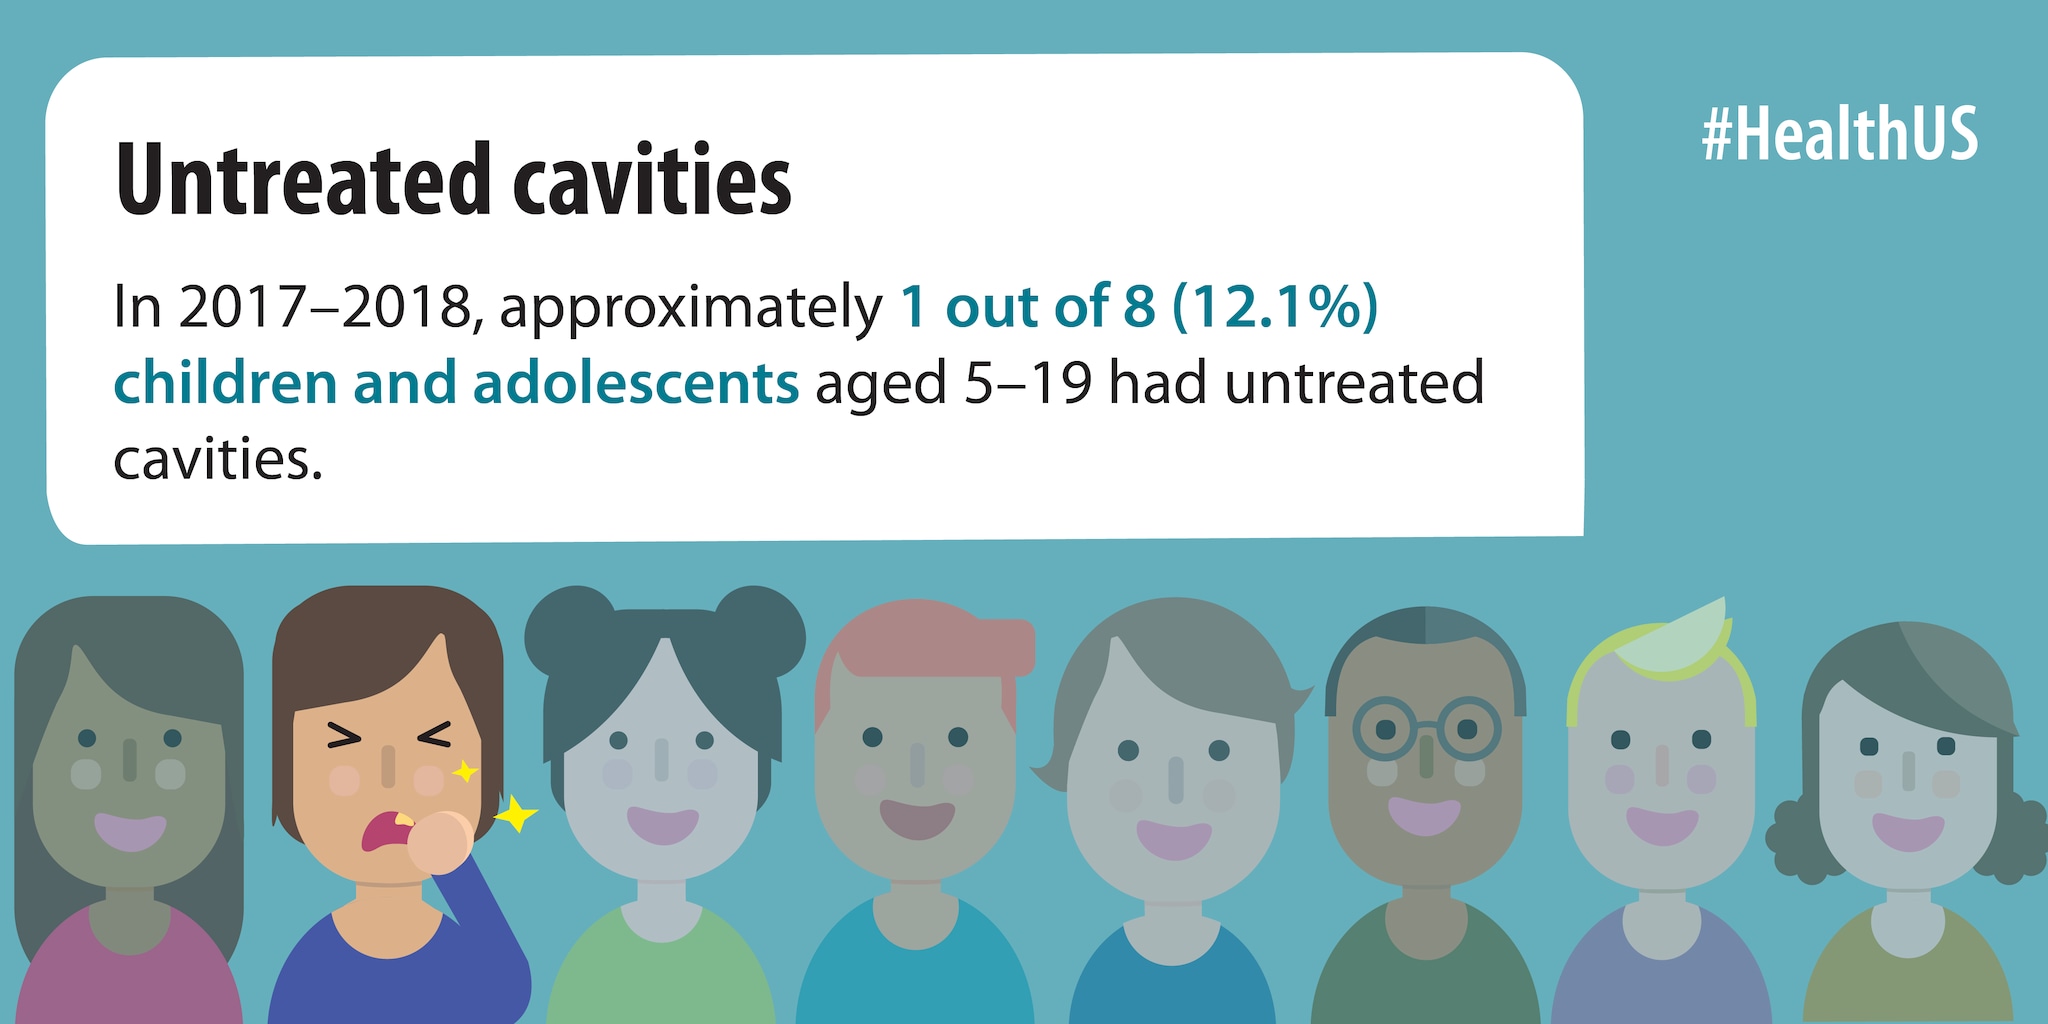 In 2017-2018, approximately 1 out of 8 (12.1%) children and adolescents aged 5-19 had untreated cavities.